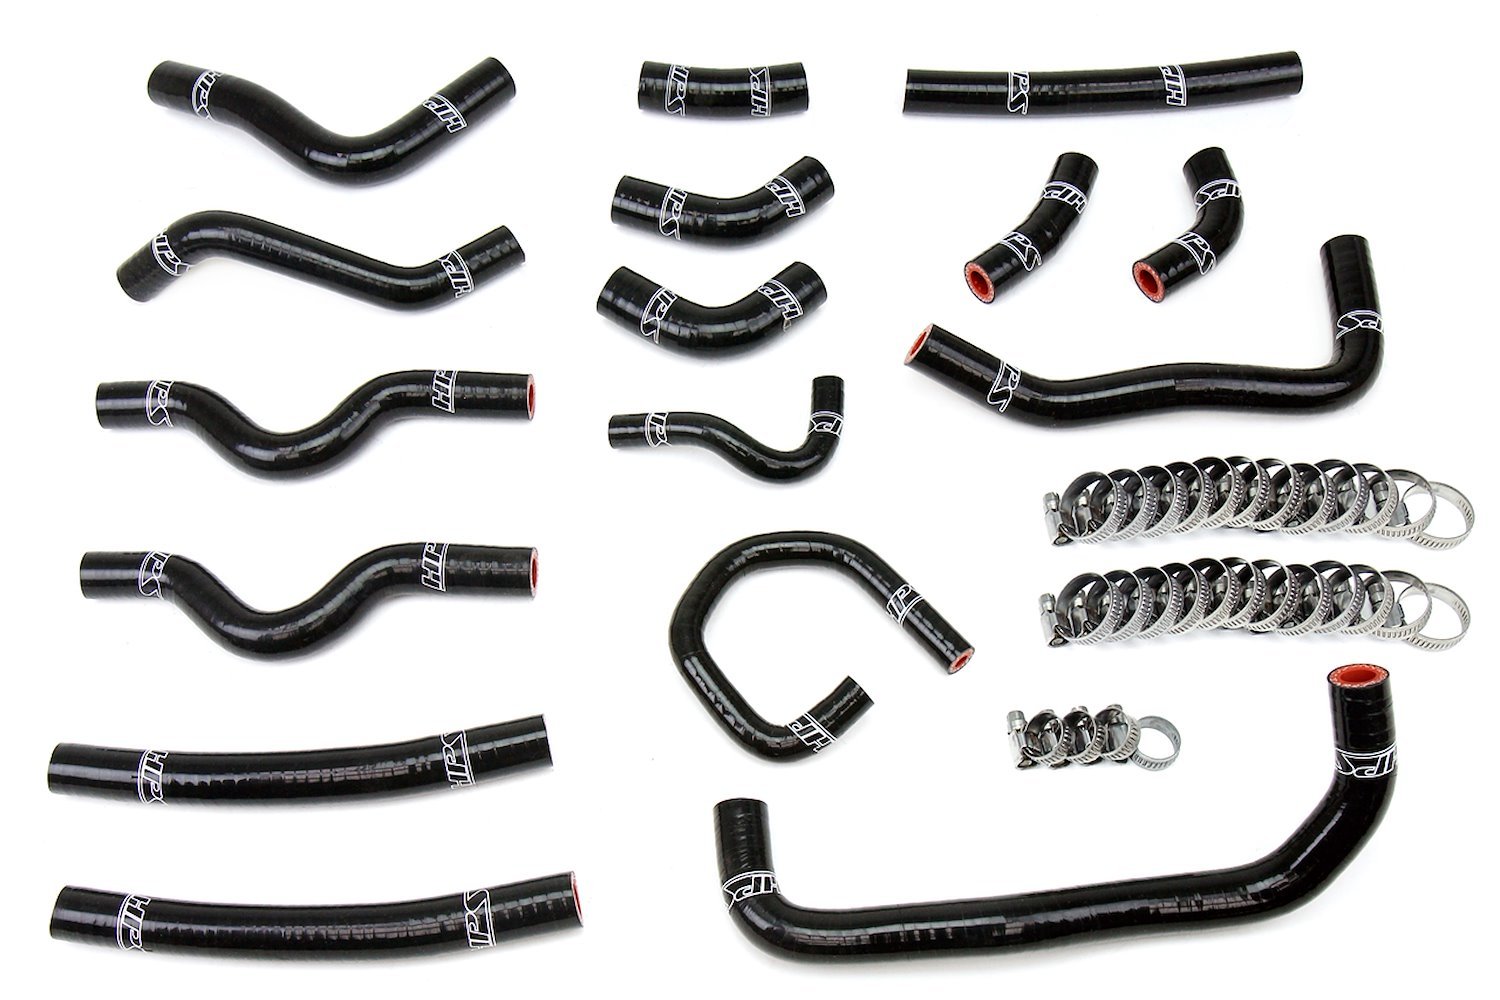 57-1913-BLK Heater Hose Kit, High-Temp 3-Ply Reinforced Silicone, Replace OEM Rubber Heater Coolant Hoses